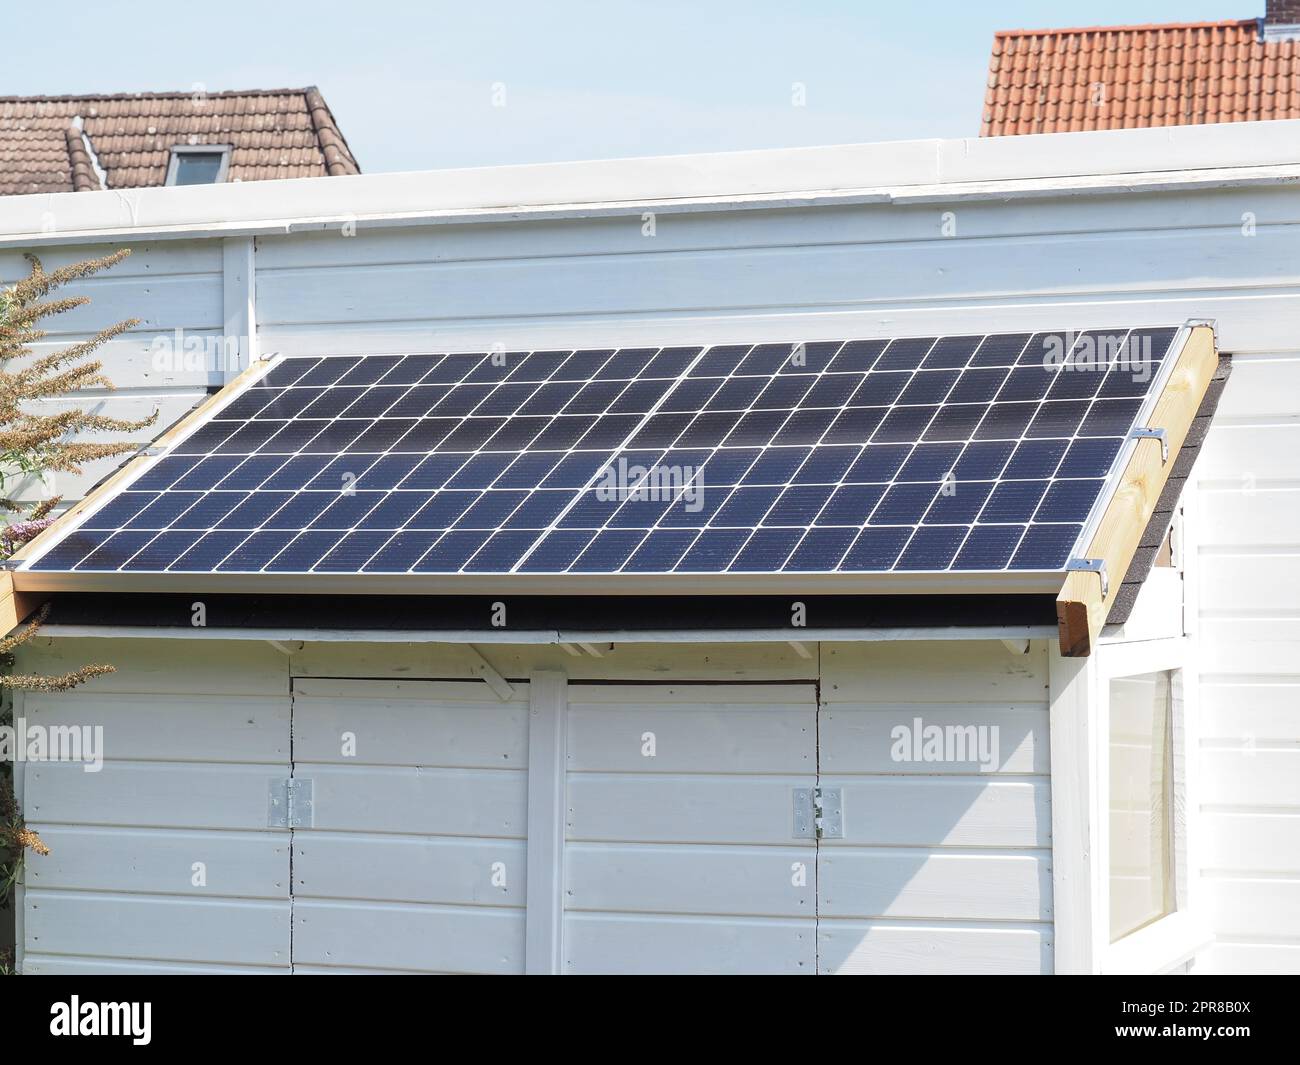 Mini photovoltaic system on a garden shed. Electricity self-sufficiency or energy transition concept Stock Photo